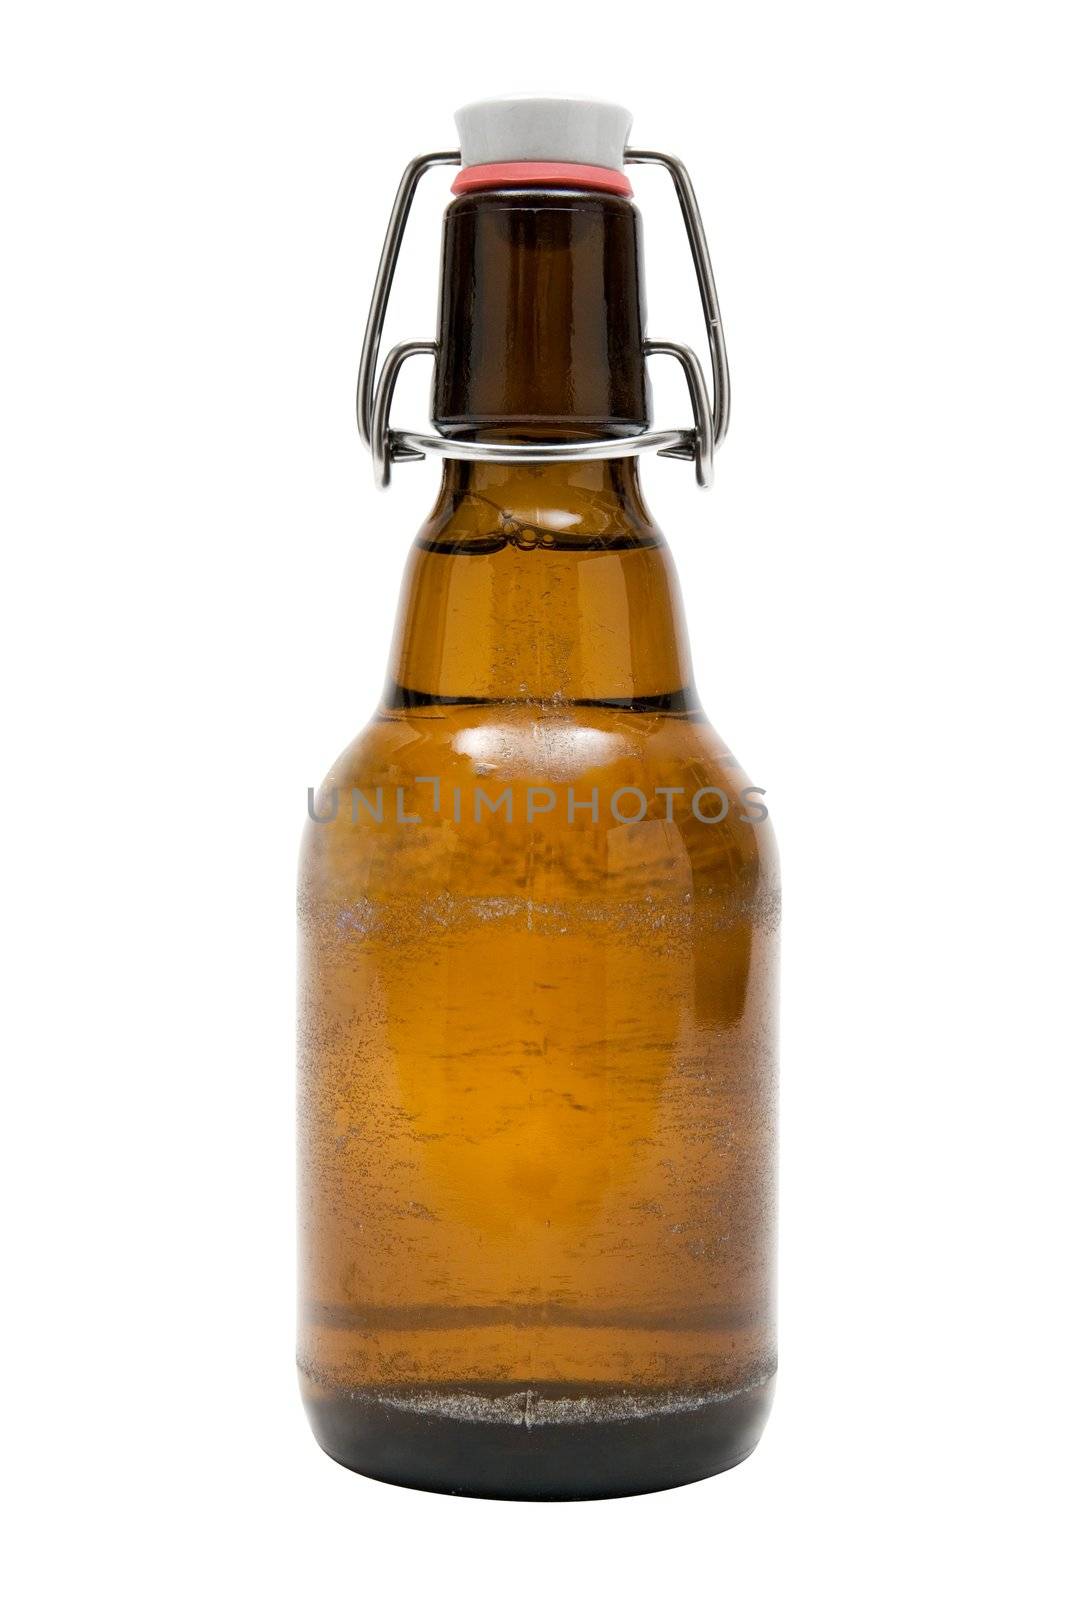 Brown bottle isolated on a white background.